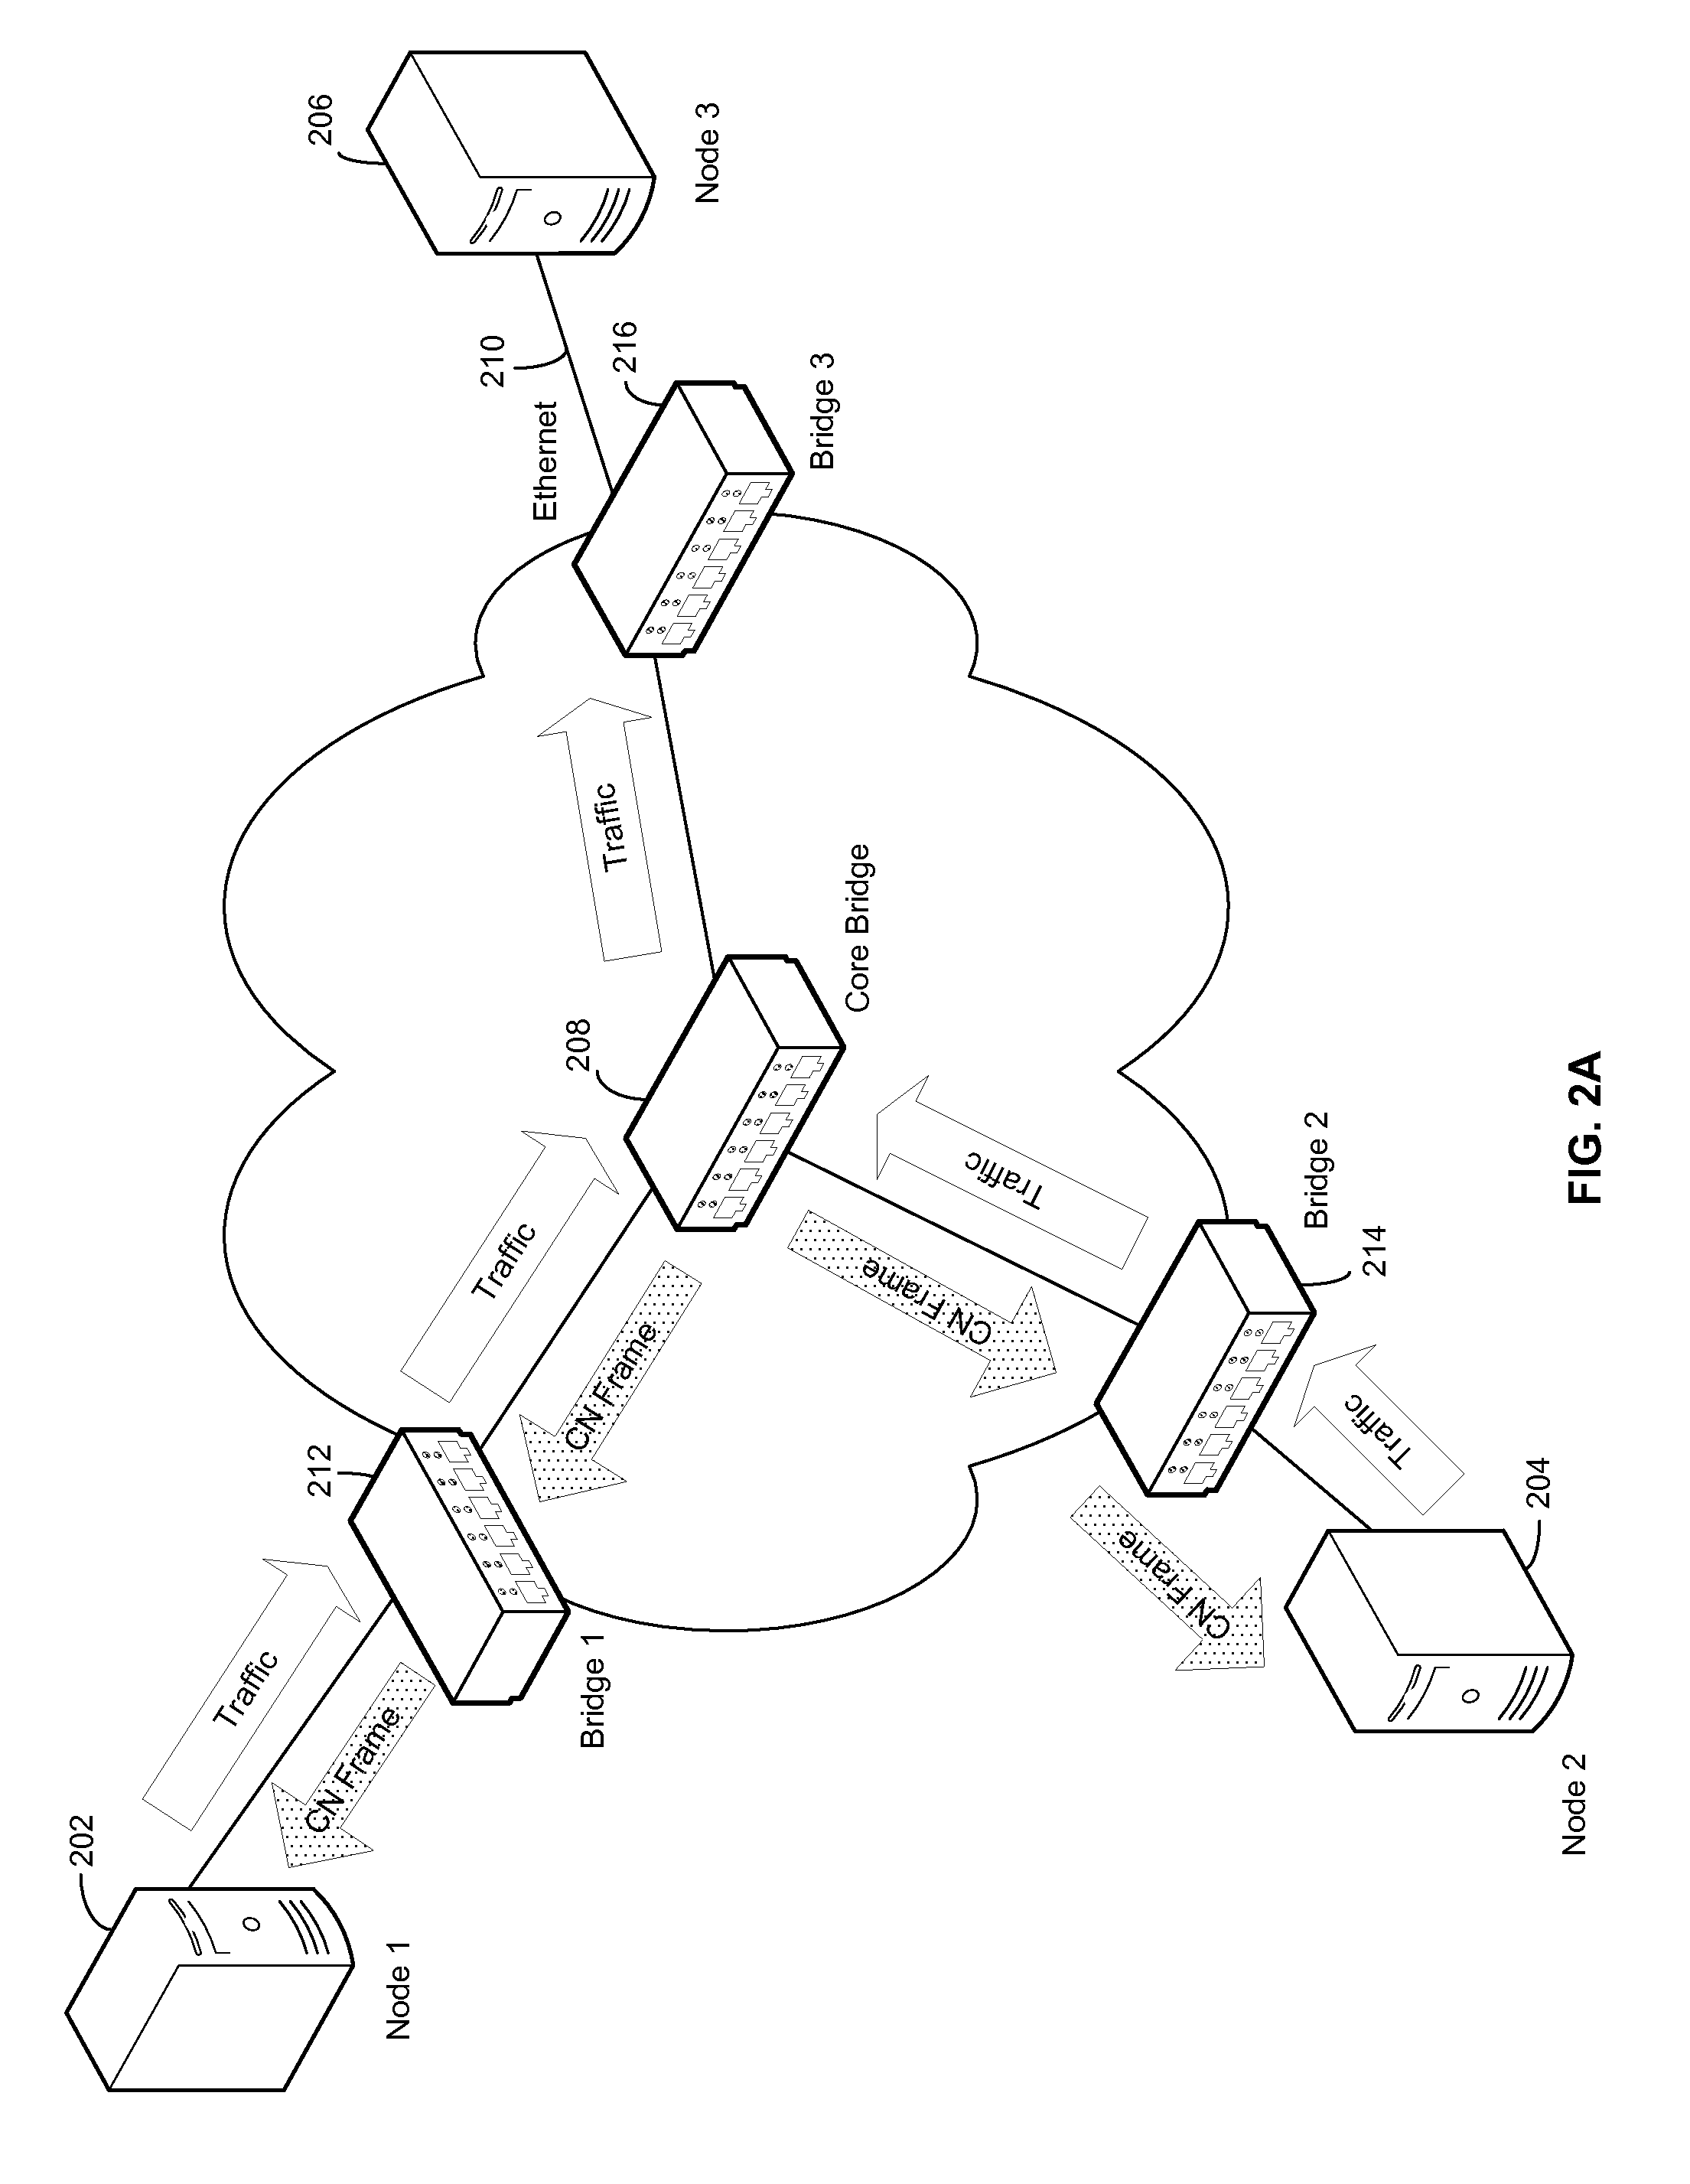 Method and System for Ethernet Congestion Management